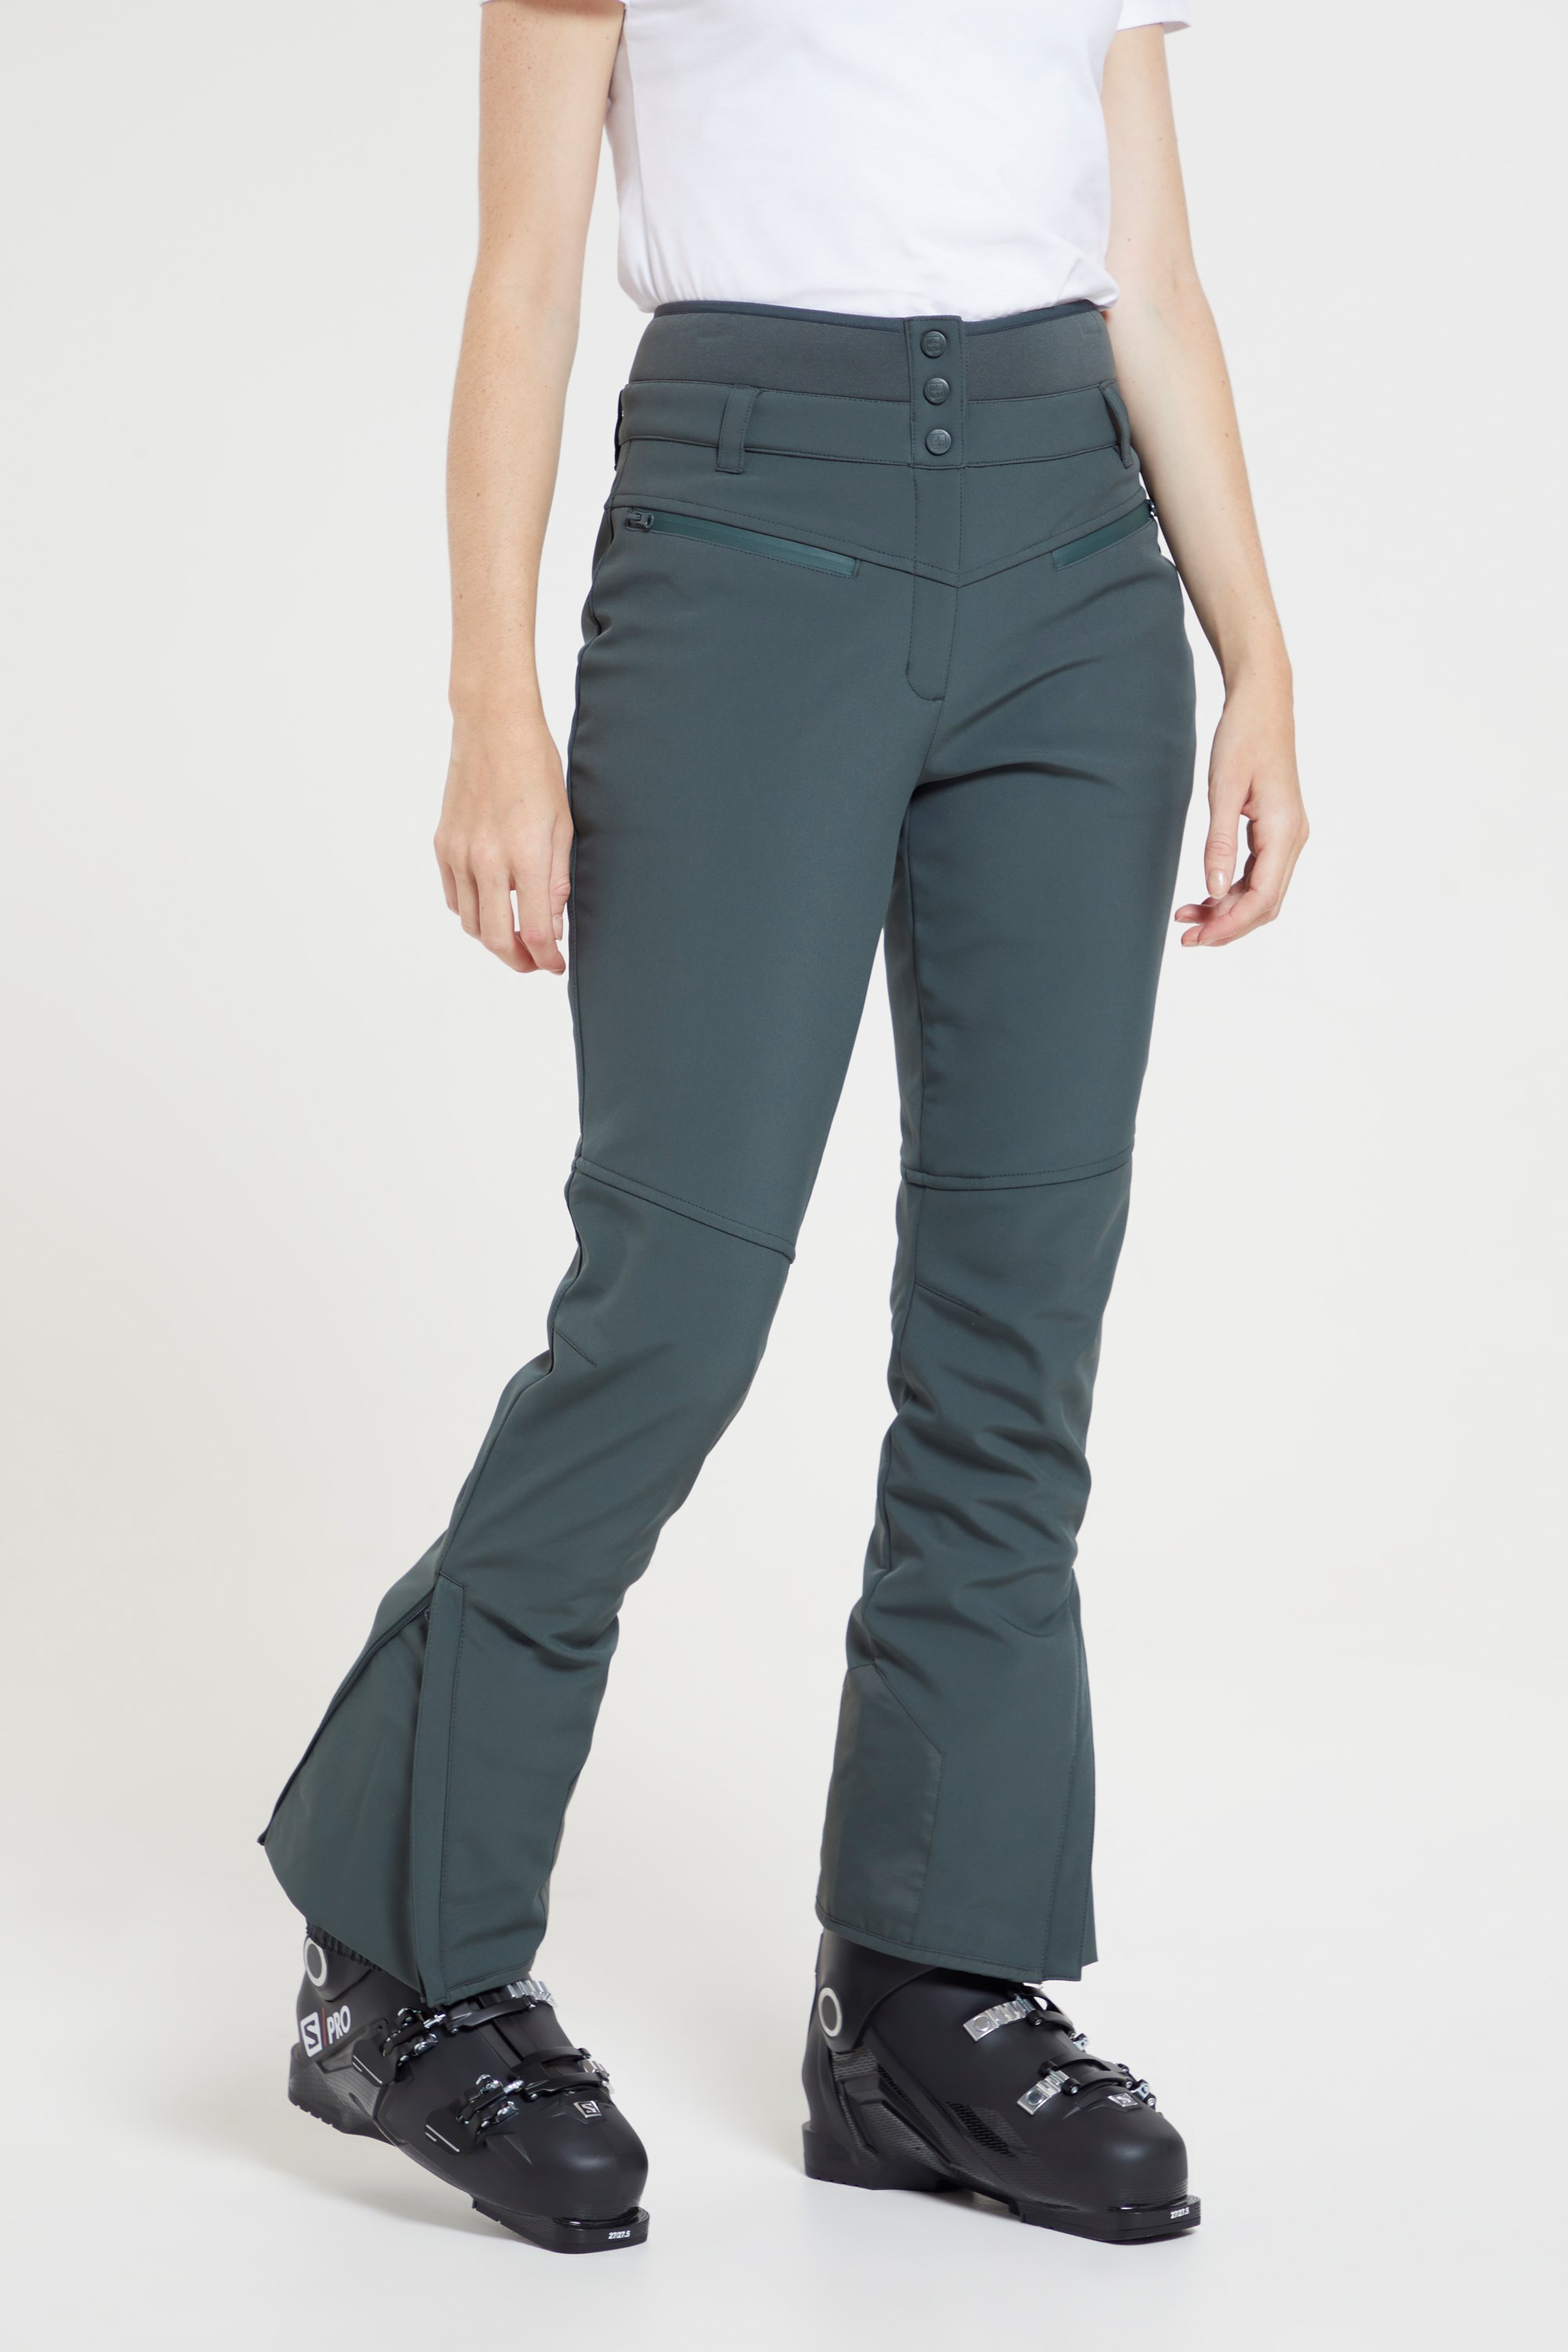 Best Ski Pants for Women: 8 Options to Help You Look Cool and Stay Warm |  TIME Stamped